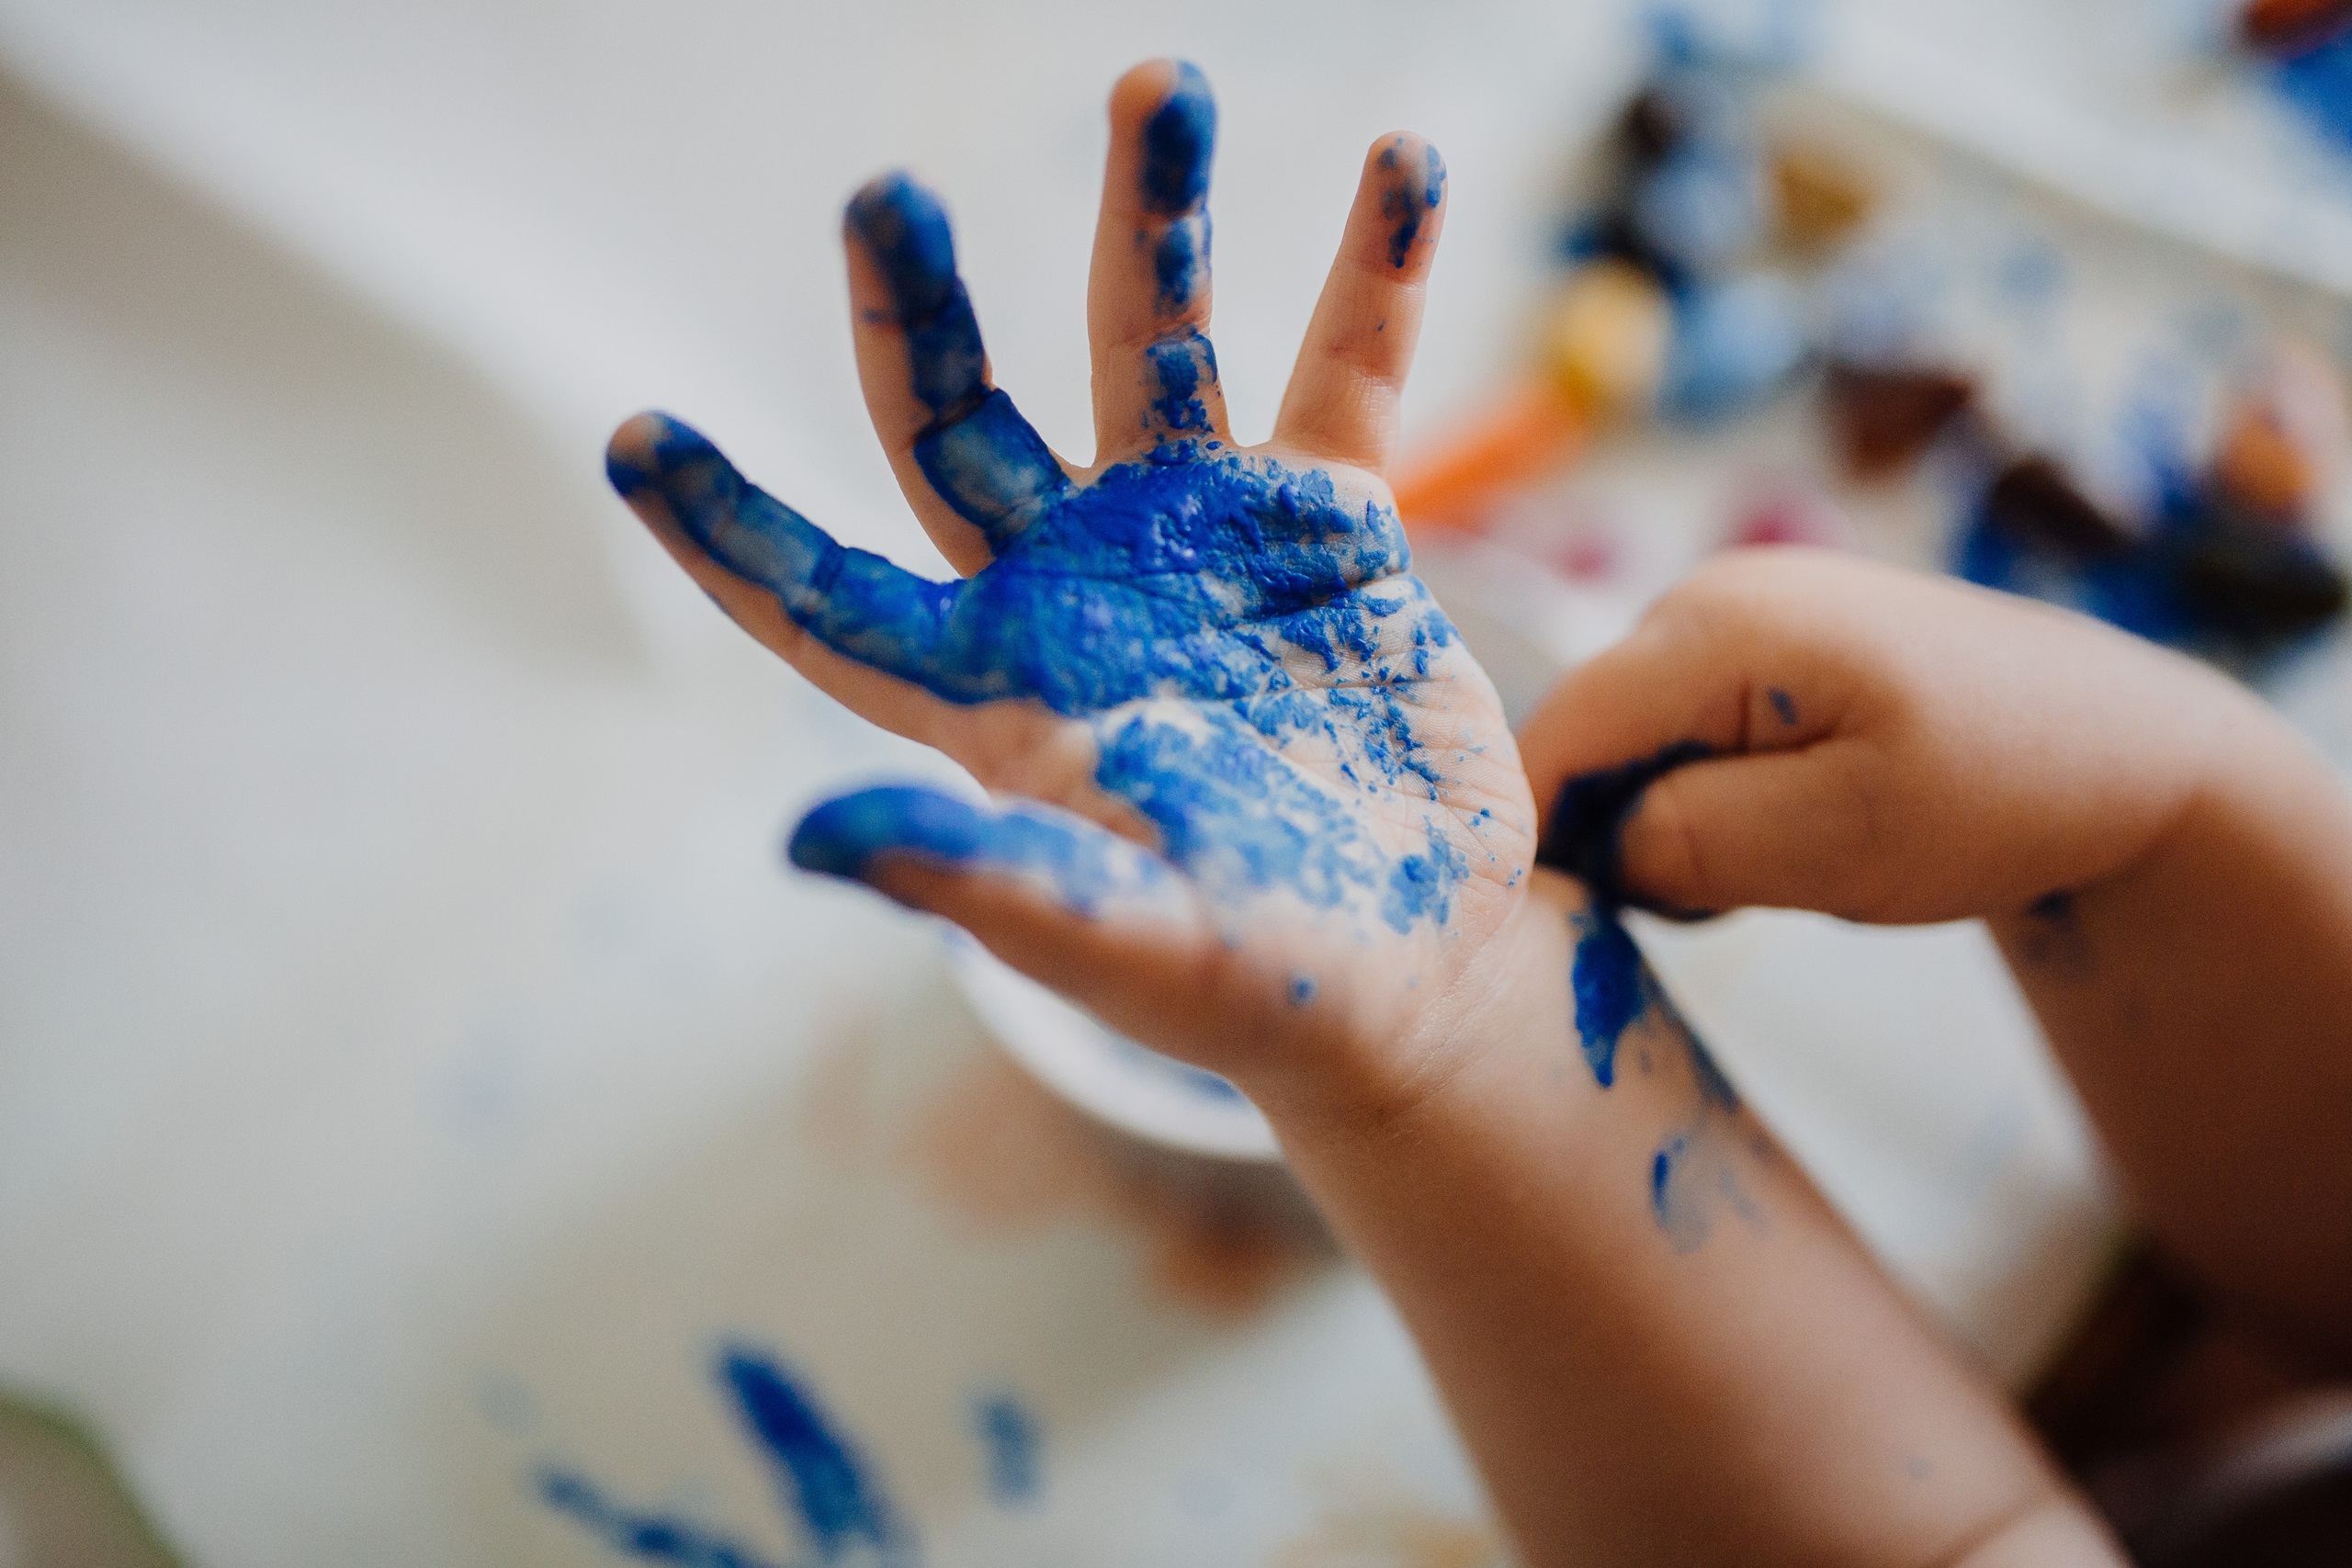 A kid painting with blue paint